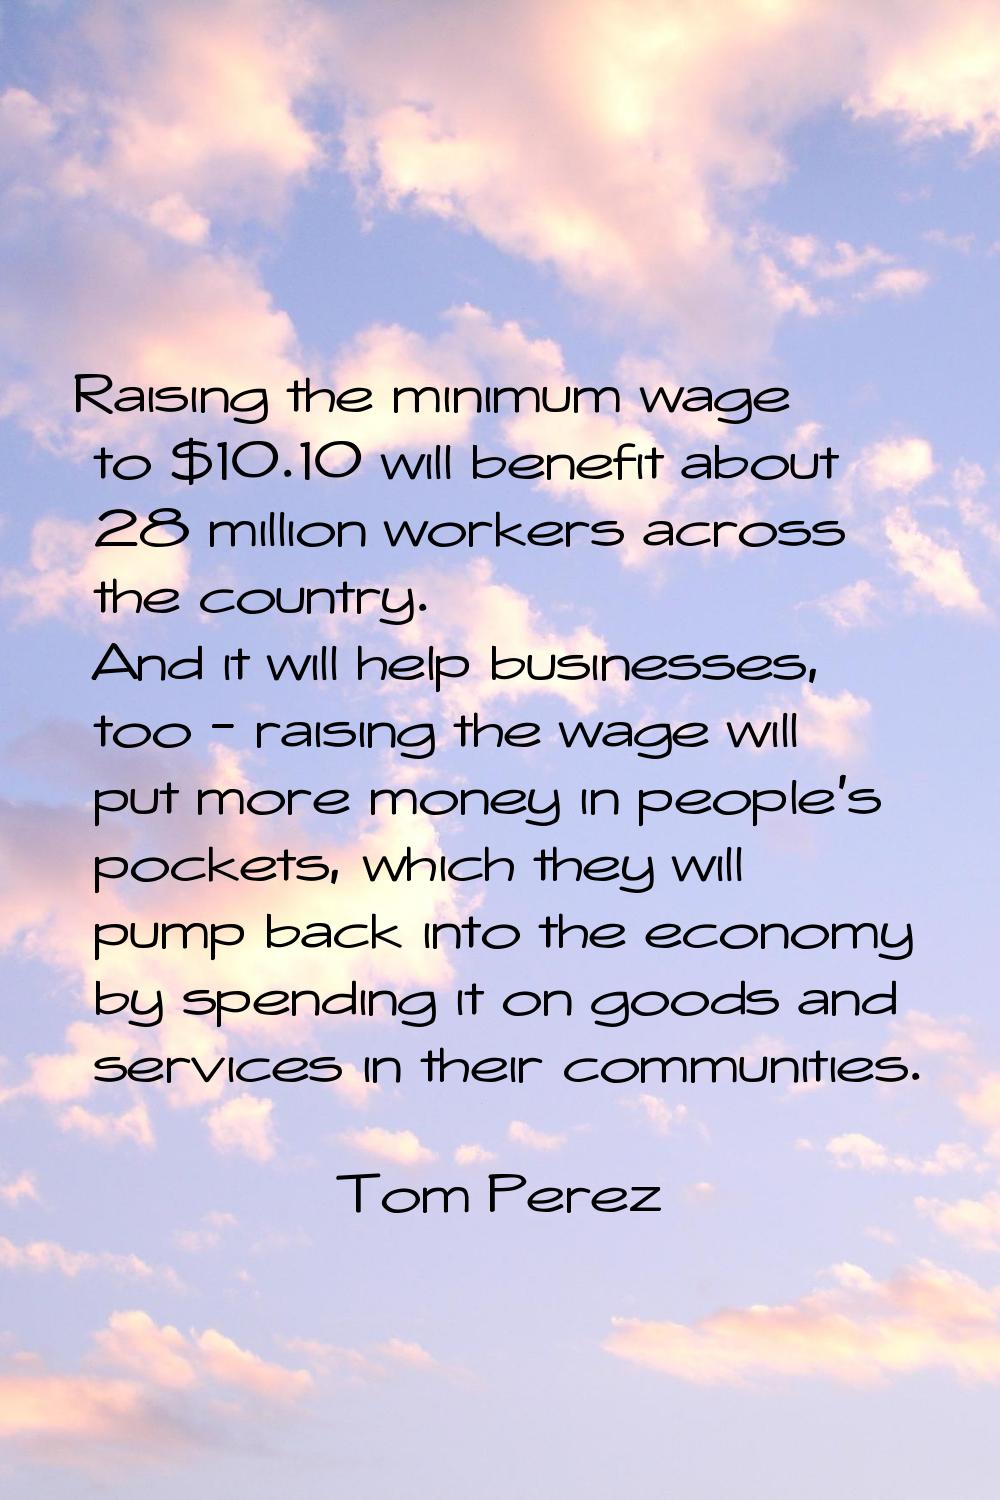 Raising the minimum wage to $10.10 will benefit about 28 million workers across the country. And it